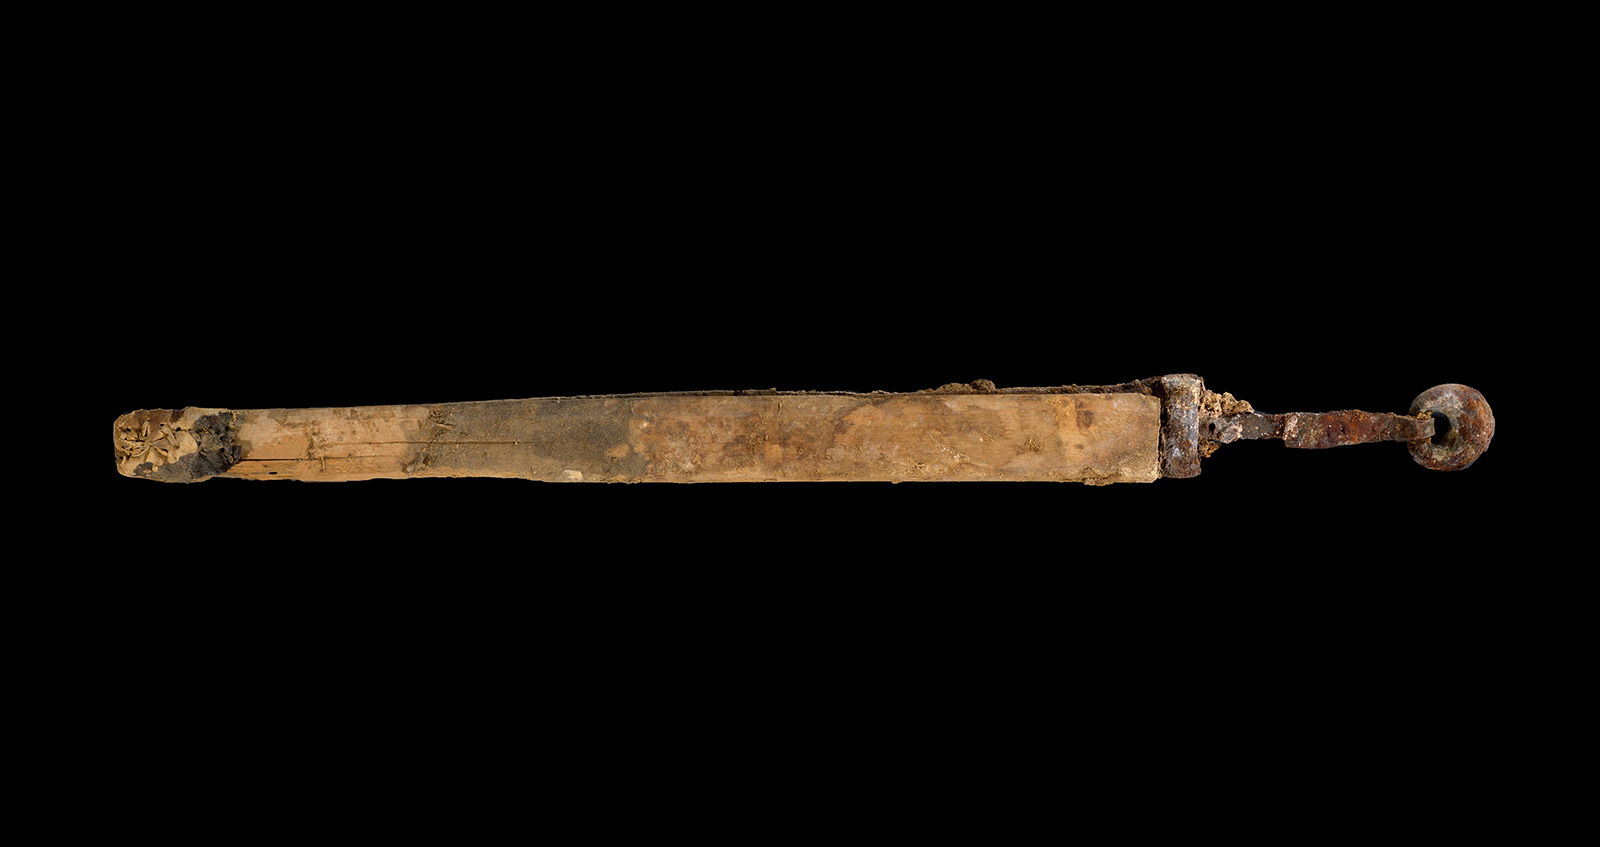 One of the swords recently found in a cave near the Dead Sea. Photo by Dafna Gazit, Israel Antiquities Authority